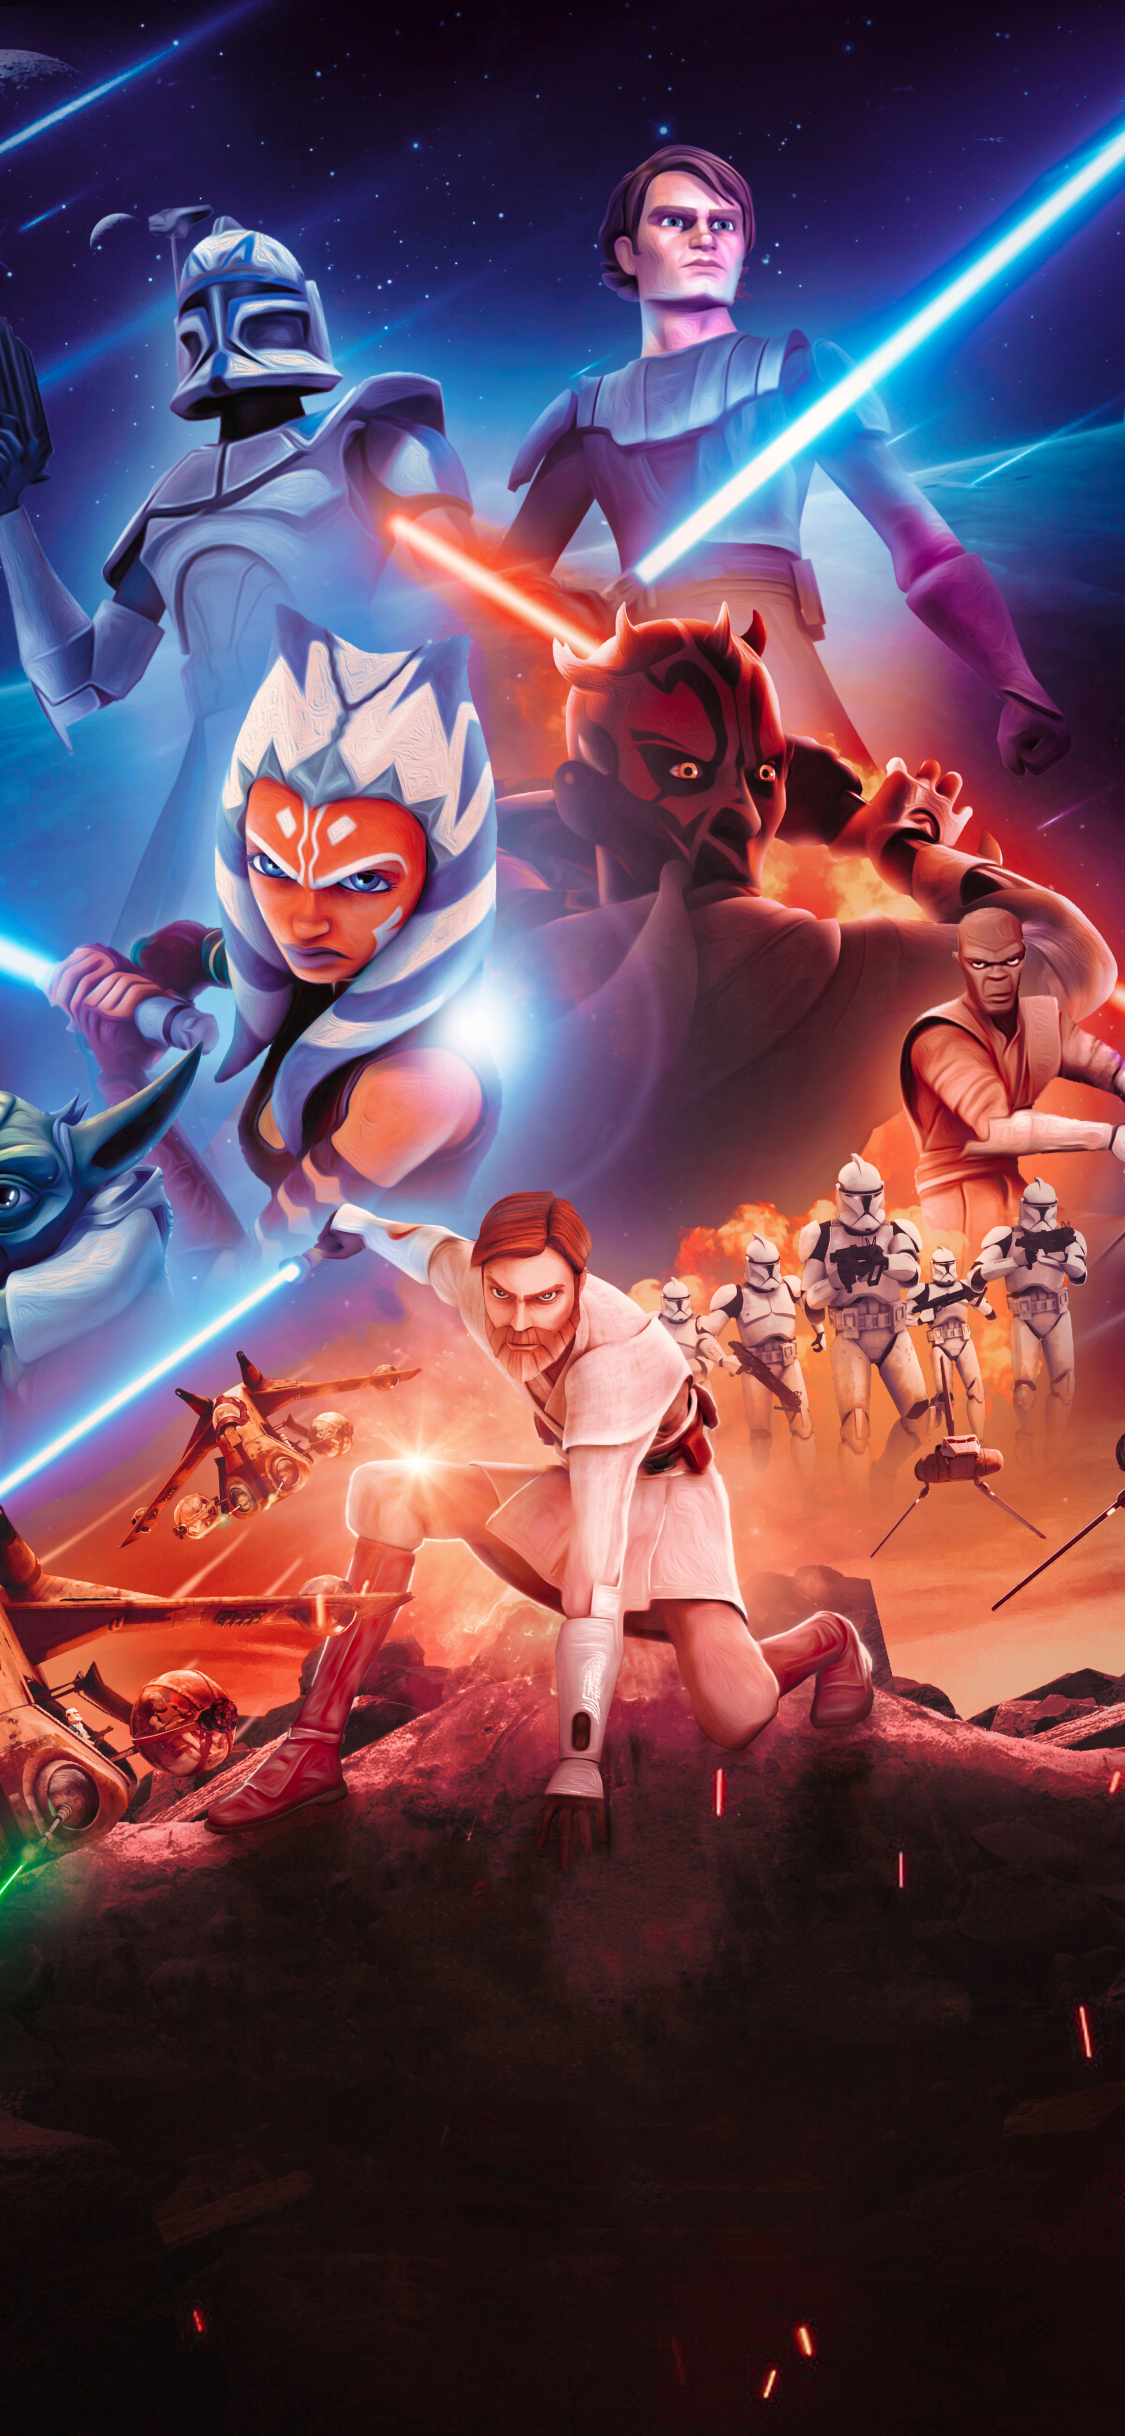 1125x2436 Star Wars The Clone Wars 4k Iphone Xs Iphone 10 Iphone X Wallpaper Hd Tv Series 4k Wallpapers Images Photos And Background Wallpapers Den